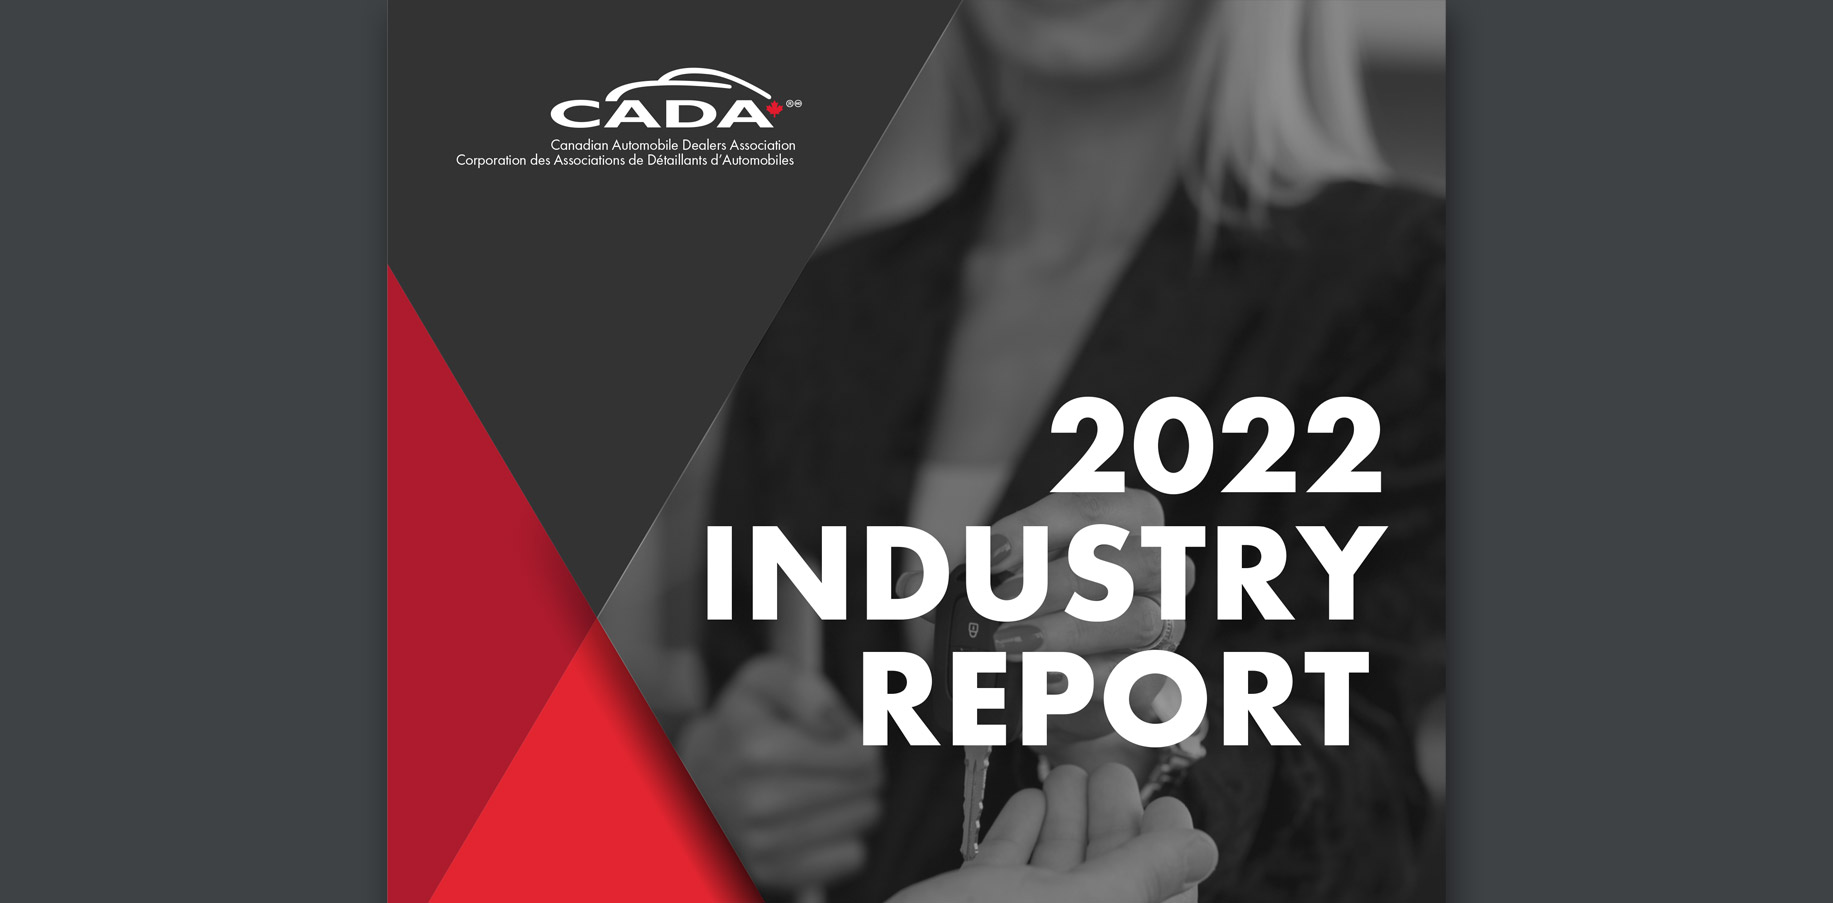 CADA shares main results of Industry Employment Report